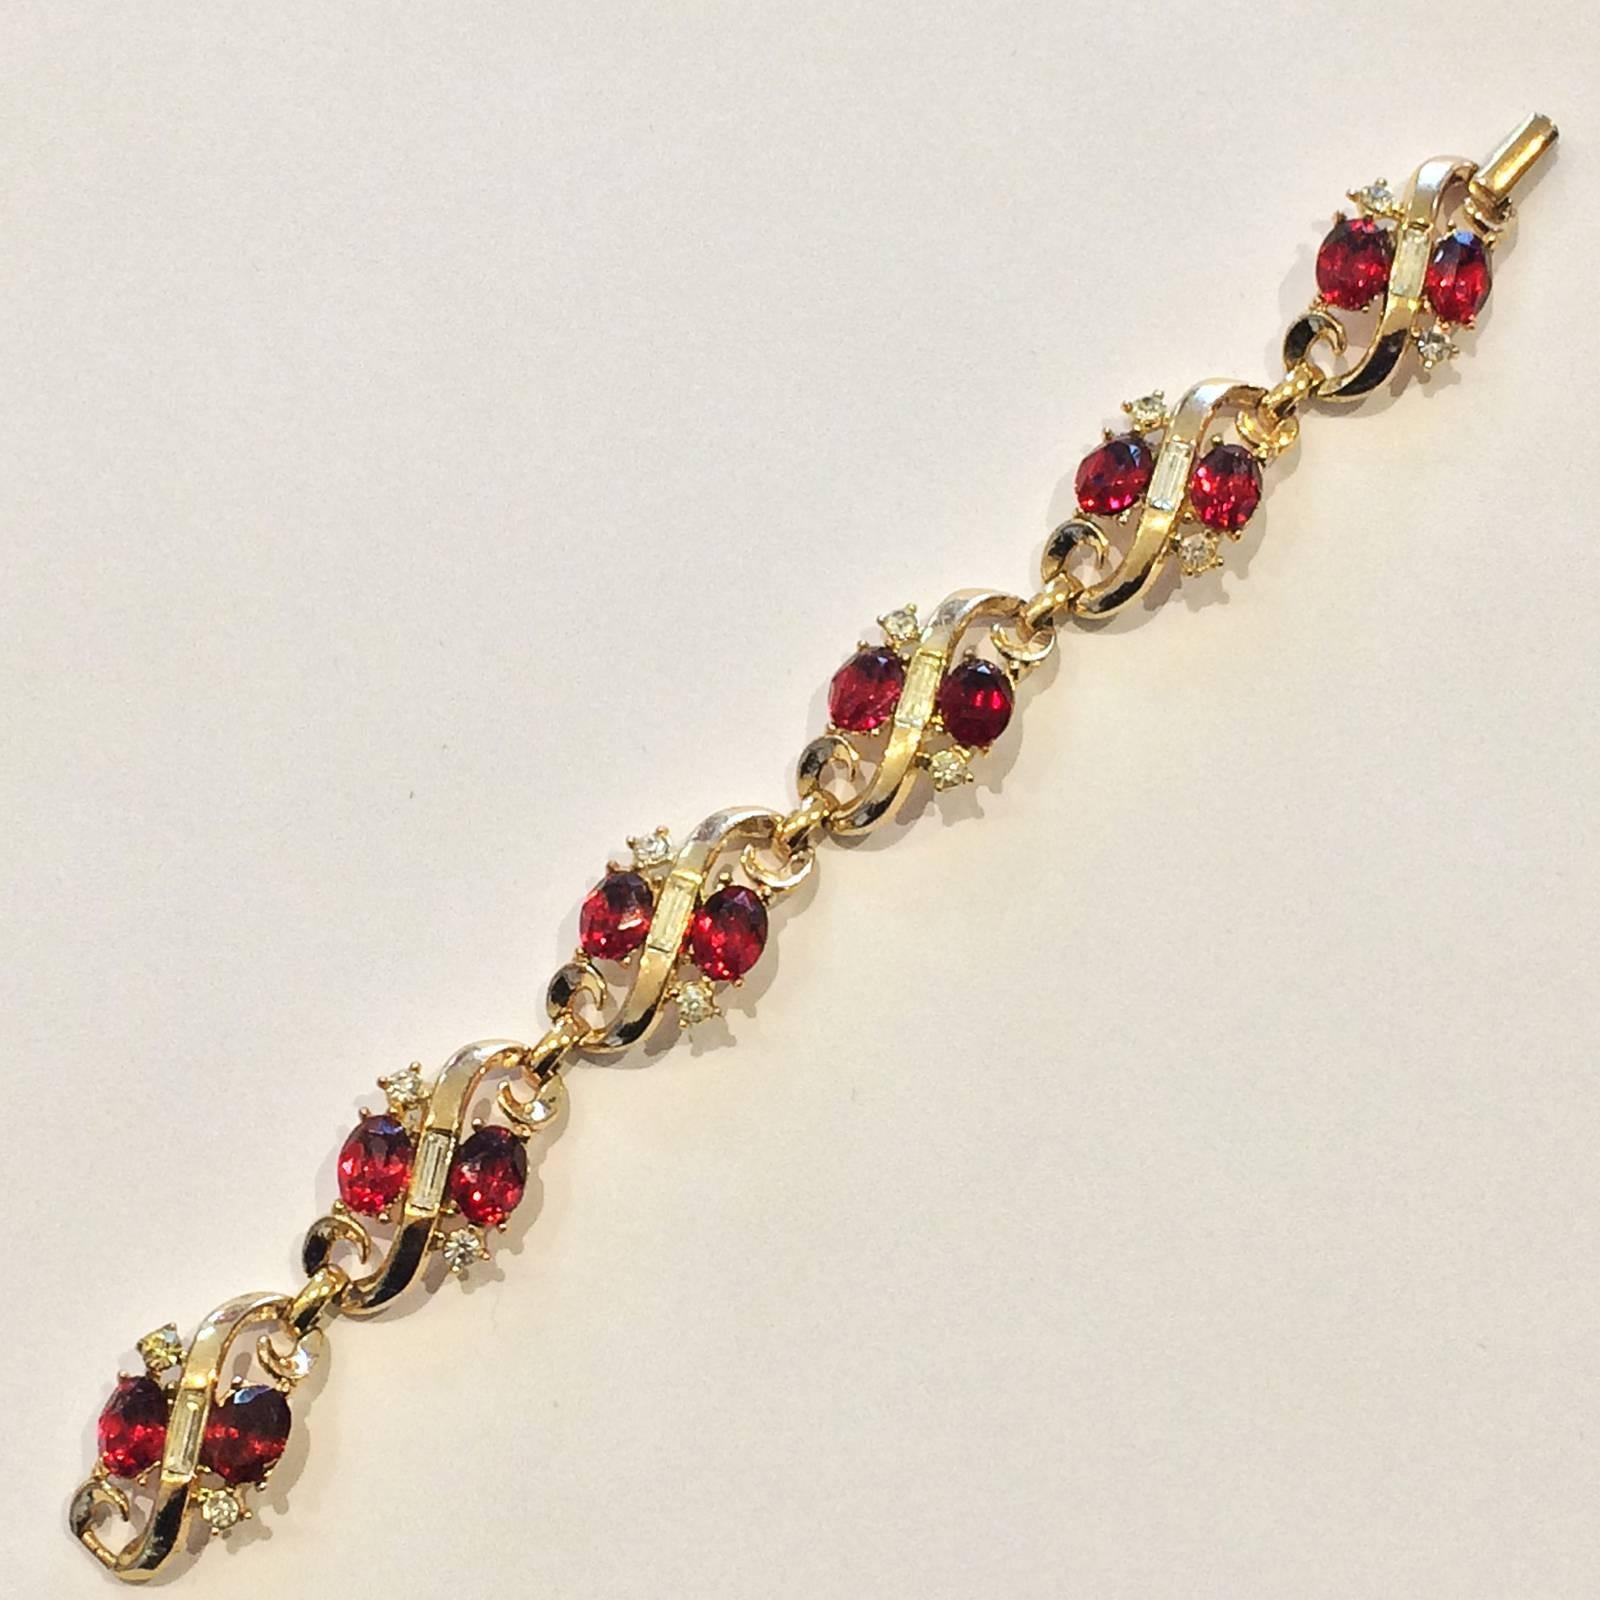 Art Deco Bracelet made by Trifari, designed by Alfred Philippe. Stunning Gilt with extraordinary Red and White Diamantes. Design has Patent Pending and marked to the Clasp “TRIFARI” over “ PAT.PEND.”.  All in absolutely perfect condition with no